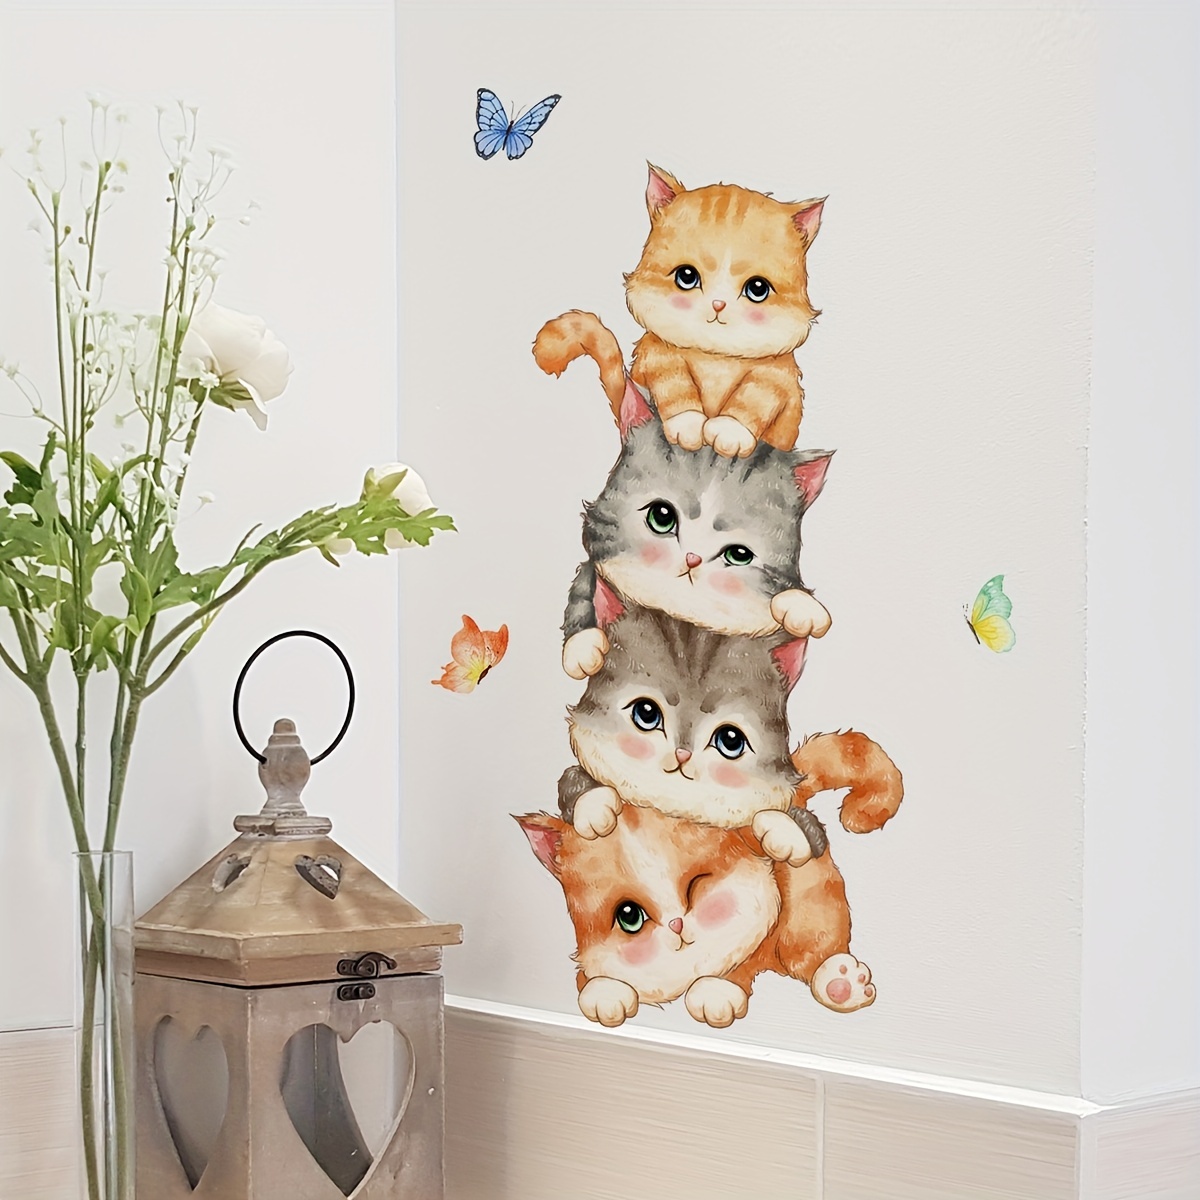 11pcs New 3D Removable Cartoon Animal Cats Large Wall Stickers, Easy to Peel Easy to Stick Safe on Painted Walls Cute Cat Decor Posters for Nursery